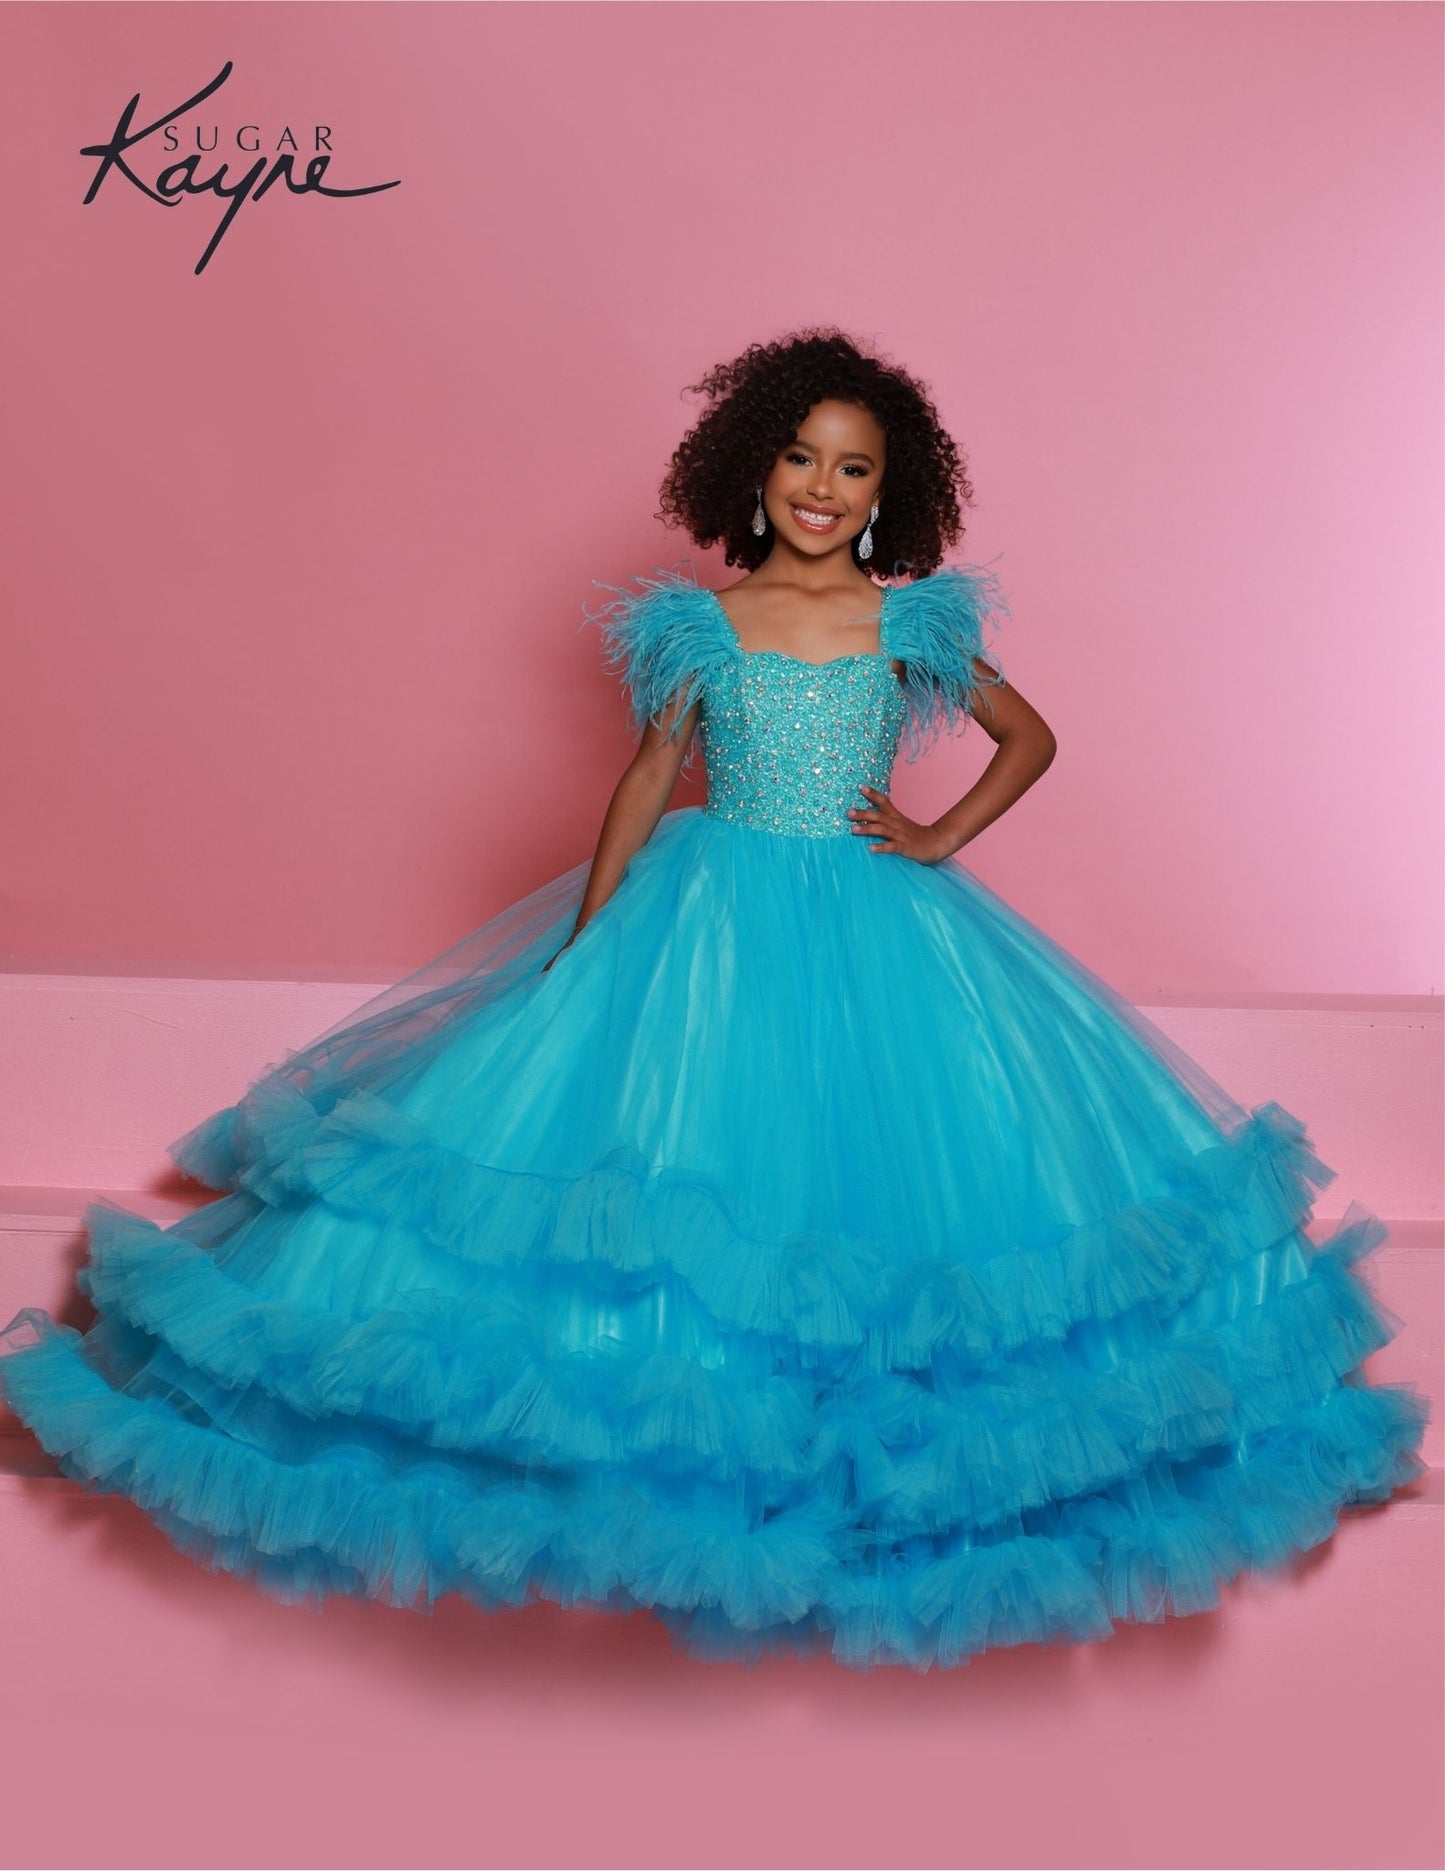 Sugar Kayne C327 features a fashionable aqua pageant dress for girls and preteens, complete with feather straps, a tiered ruffle bottom, and a crystal stone bodice.